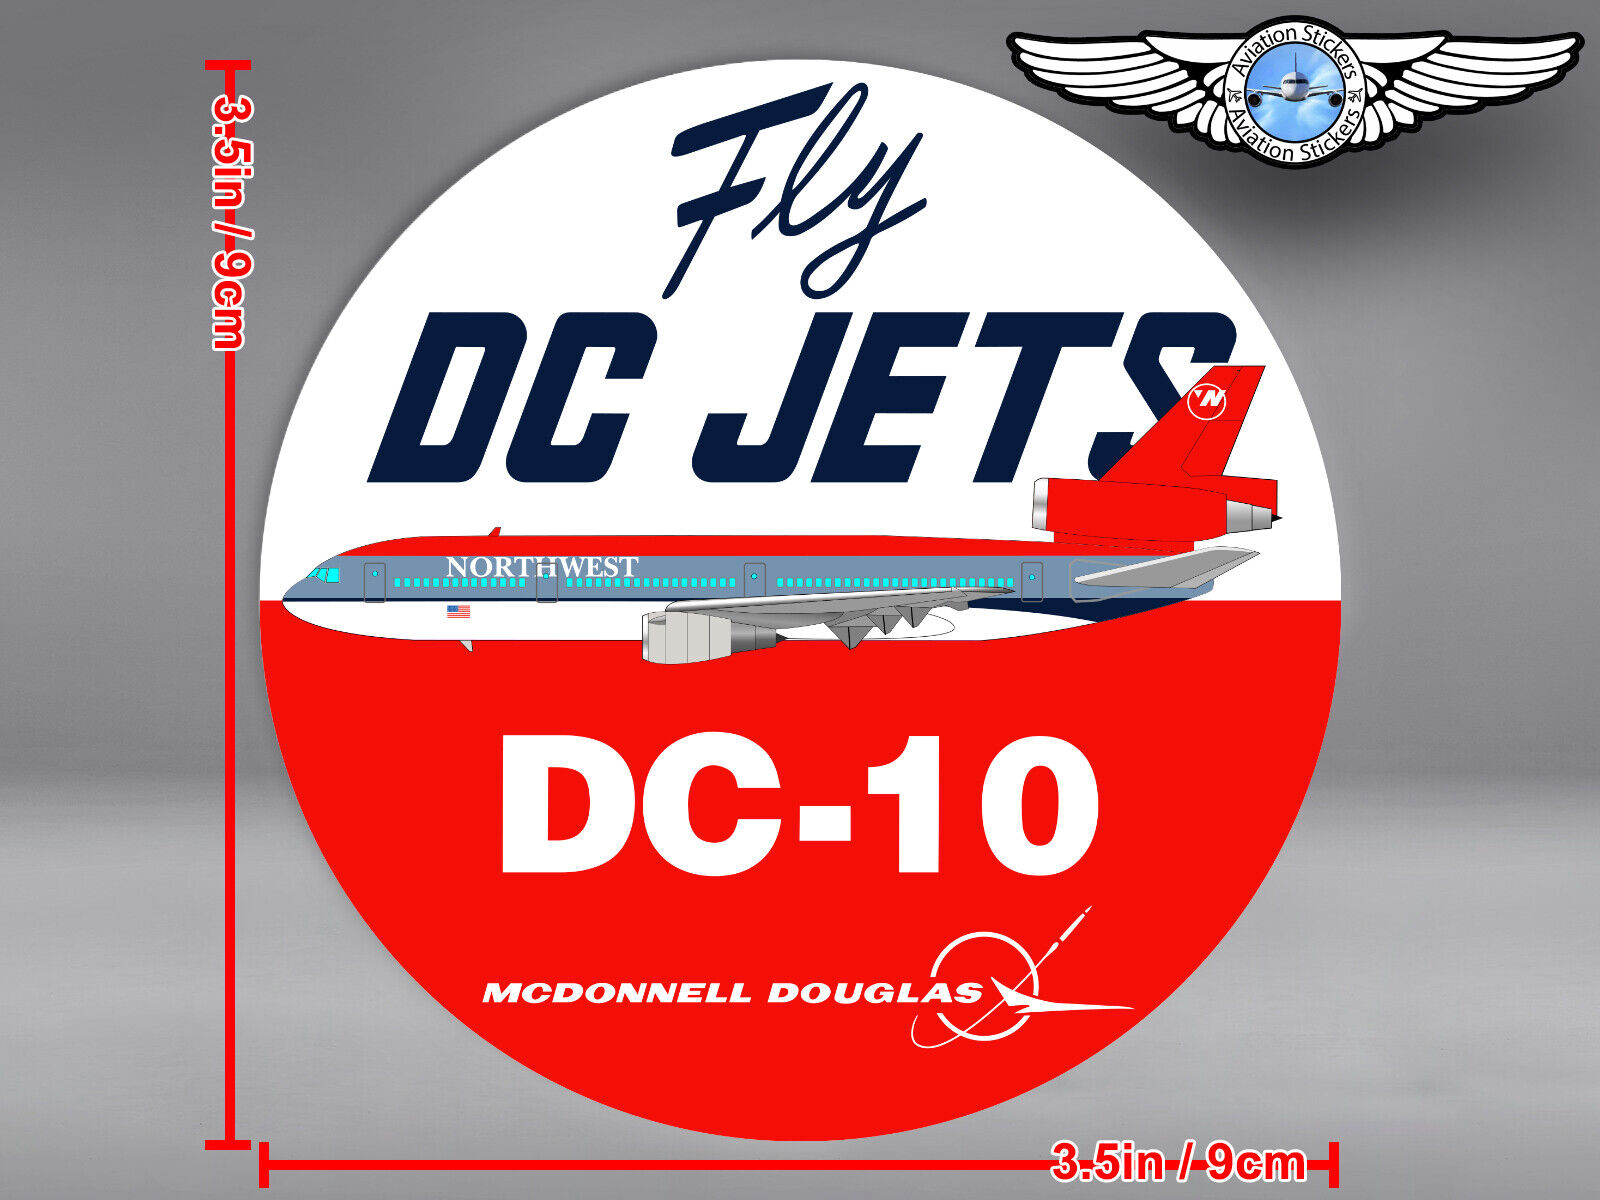 NORTHWEST AIRLINES NWA ROUND BOWLING SHOE DC10 DC 10 FLY DC JETS DECAL / STICKER